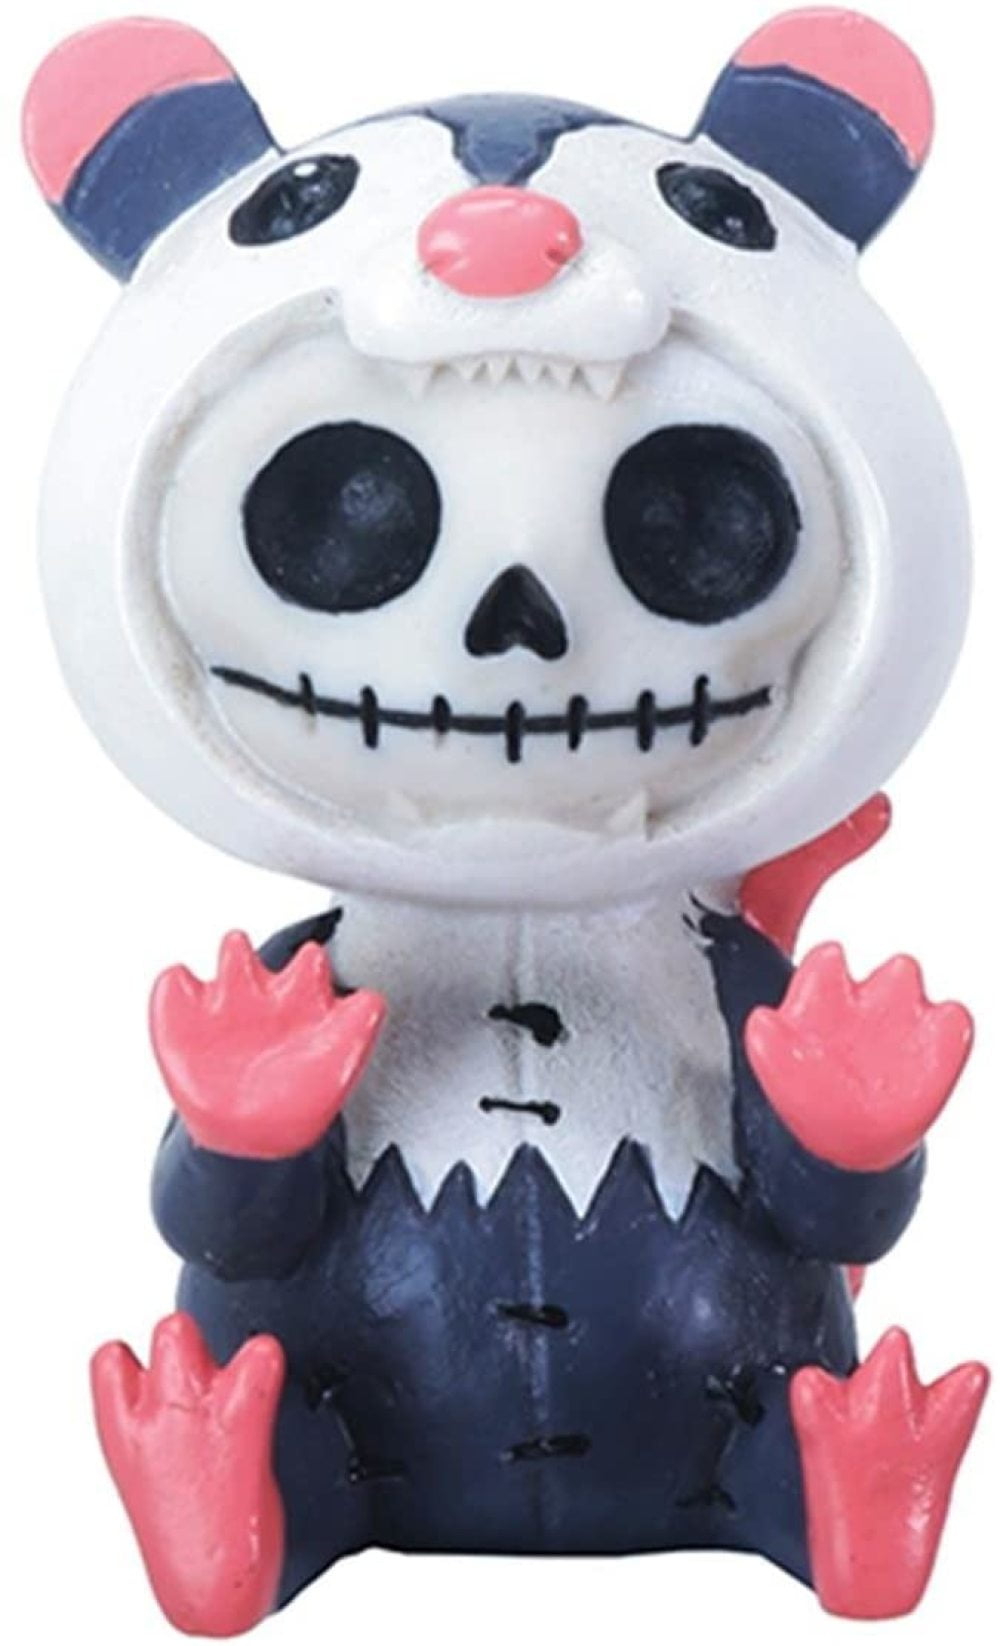 Summit 4.25" tall Lucky The Skeleton Hears No Evil with A Black Crow Figurine 